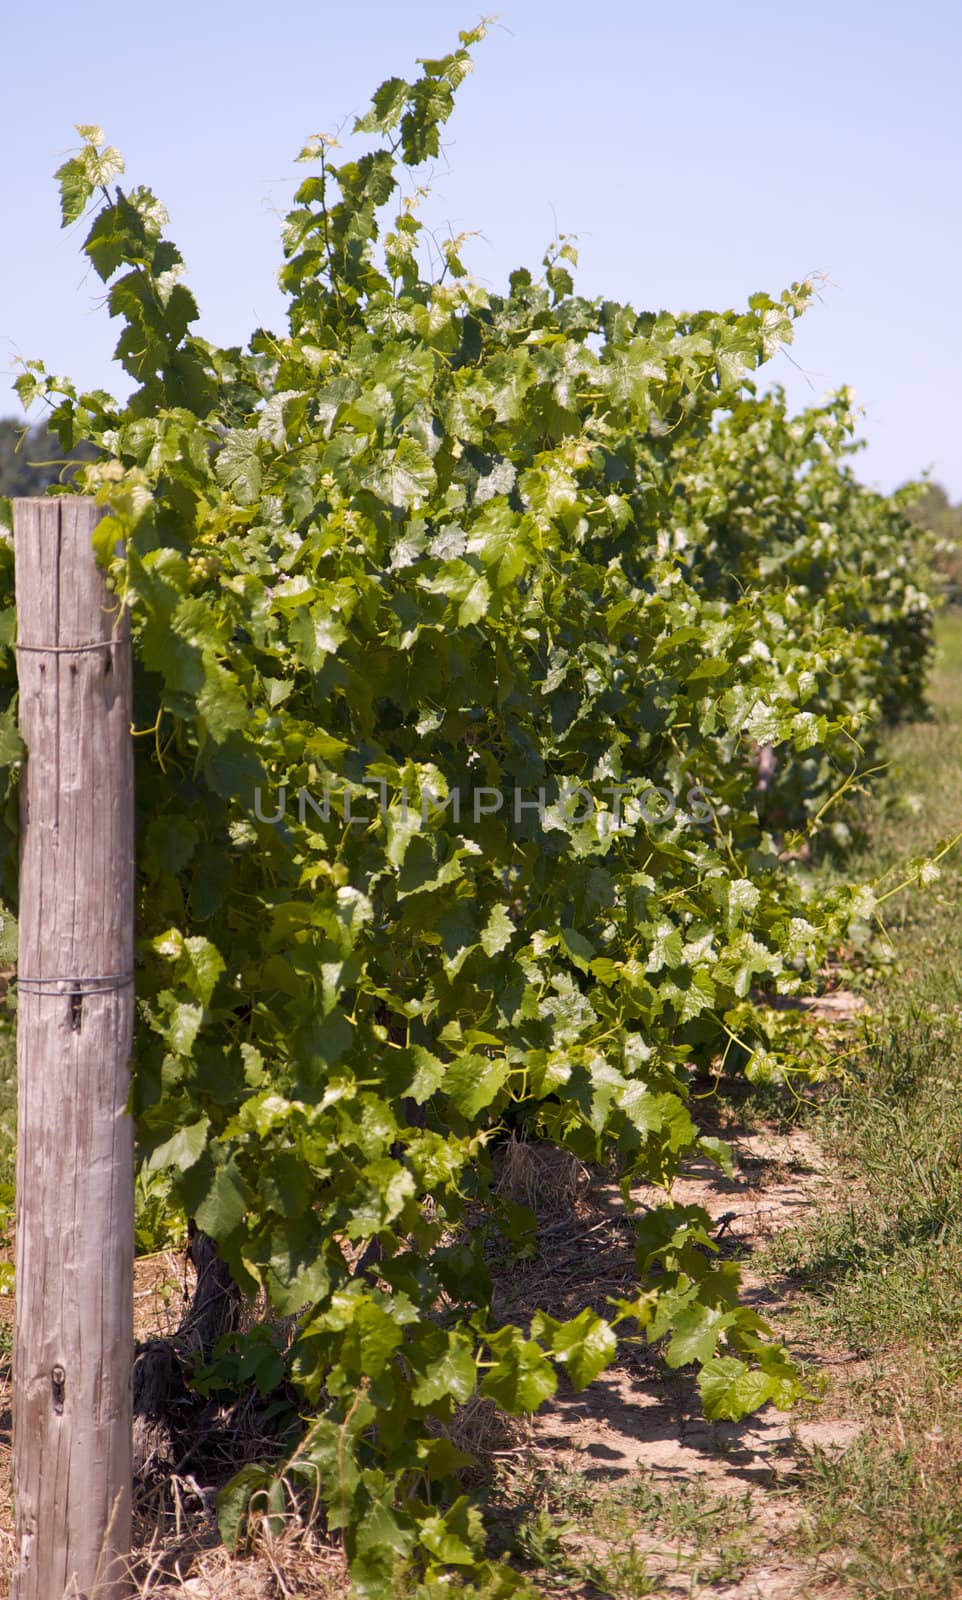 End of vineyard row with grapes looking down the row